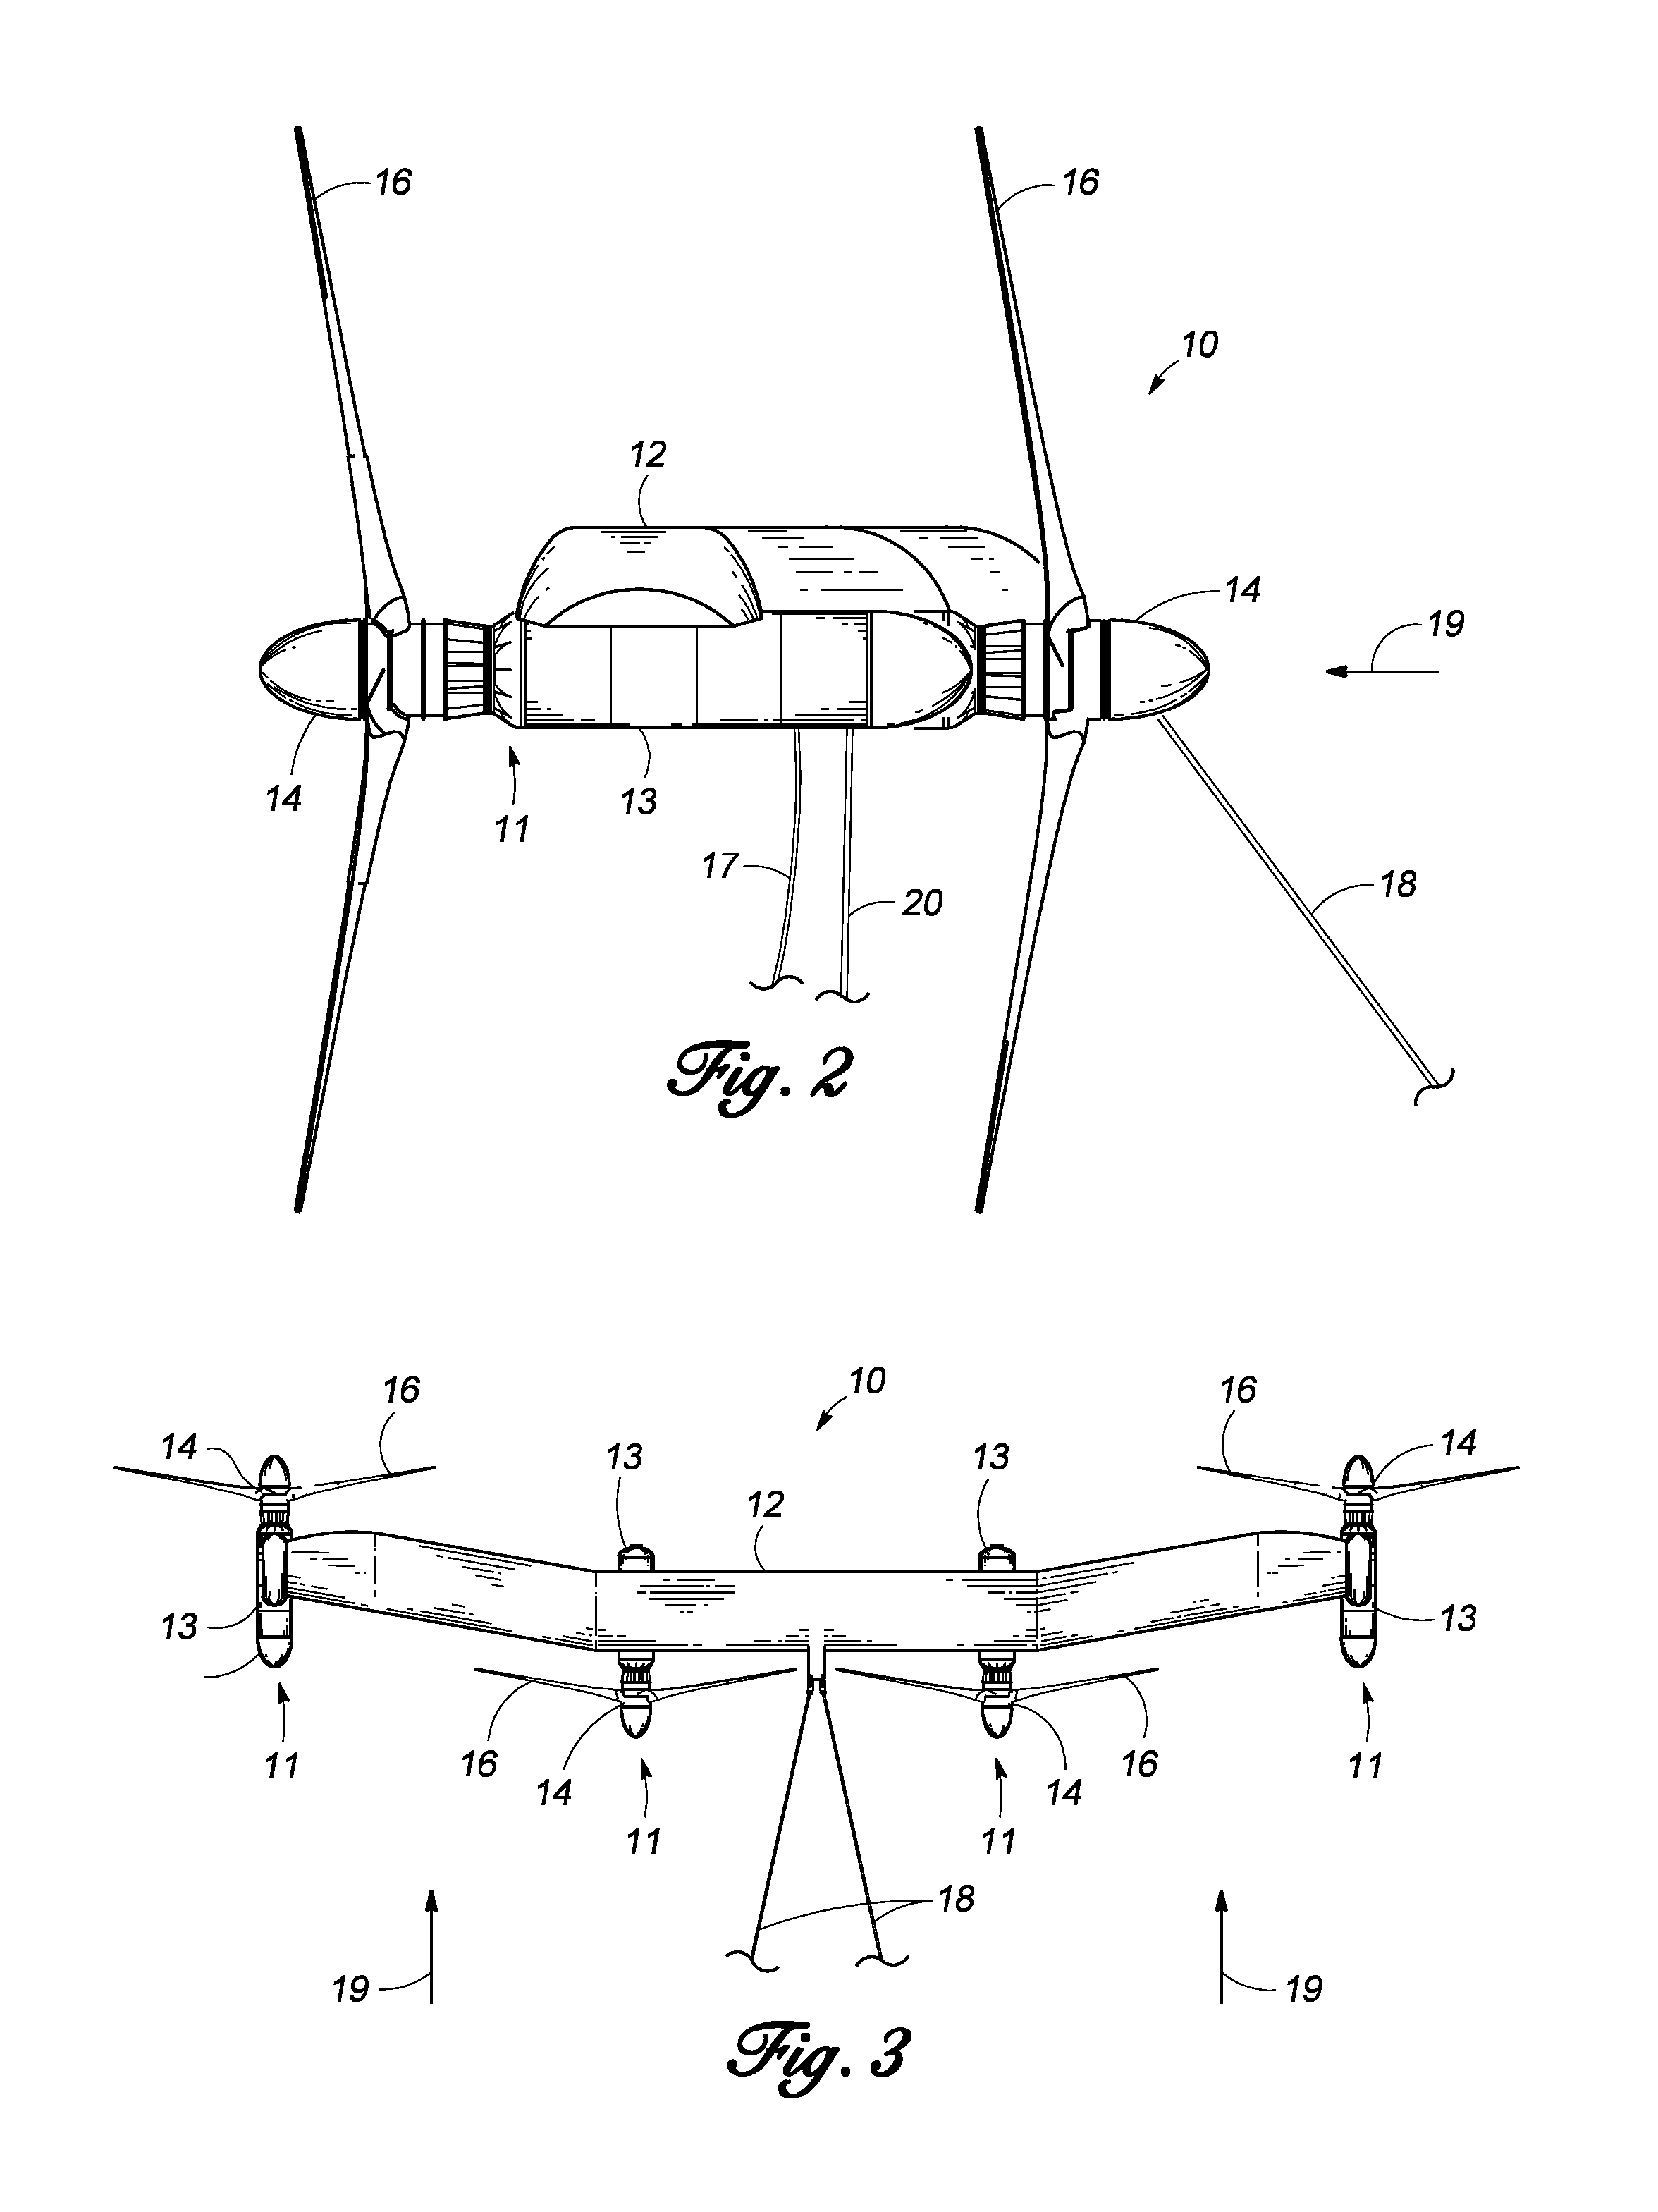 Submerged electricity generation plane with marine current-driven rotors